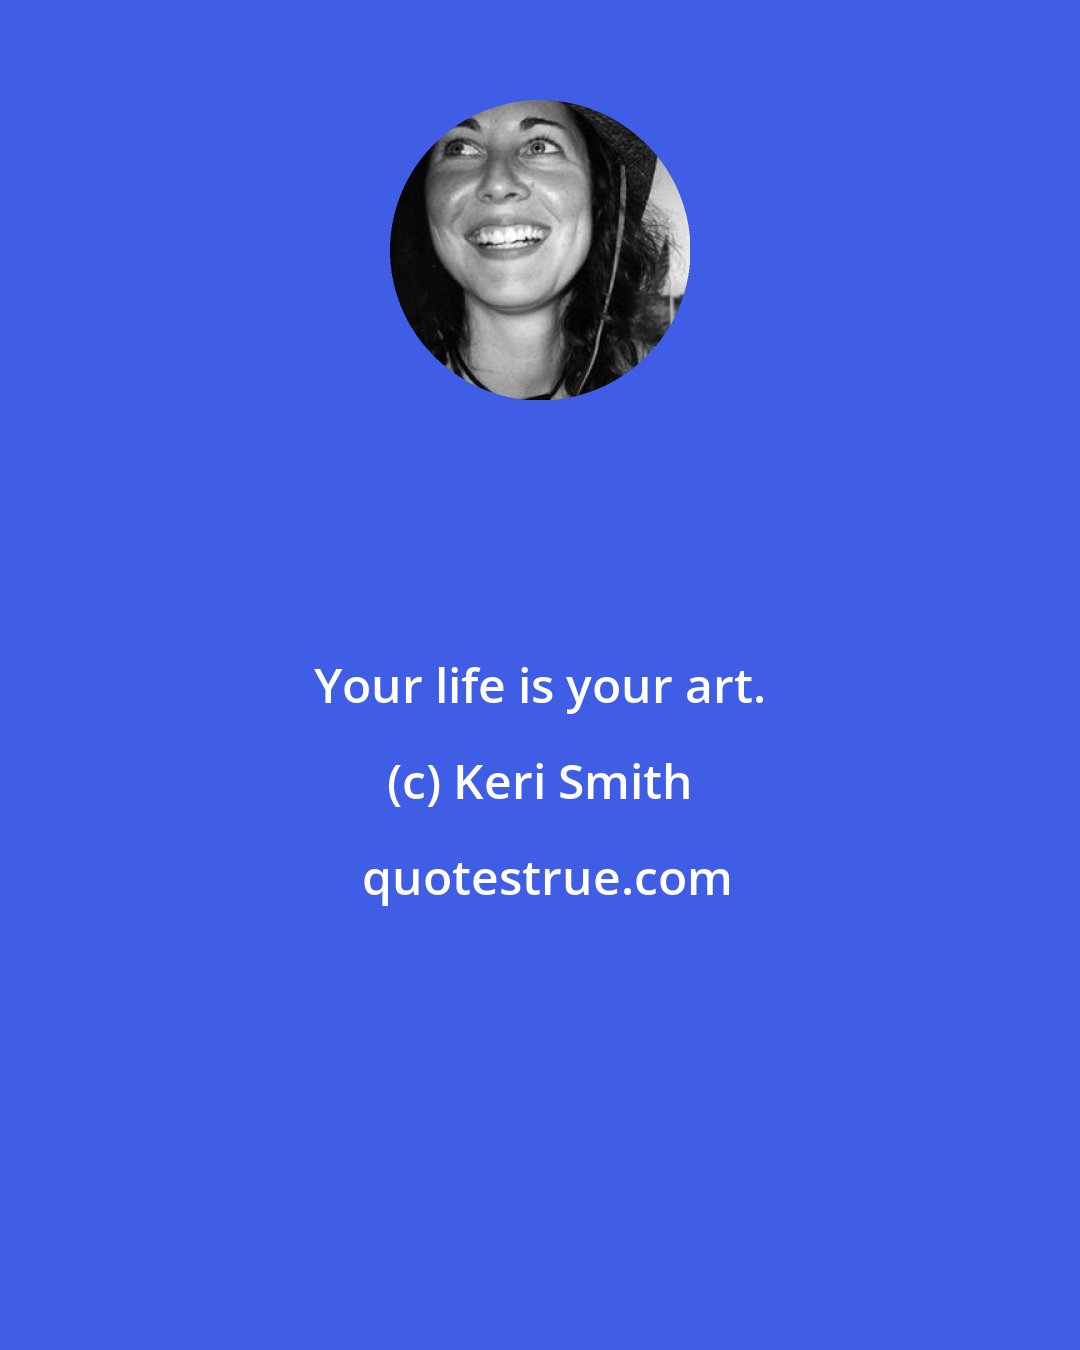 Keri Smith: Your life is your art.